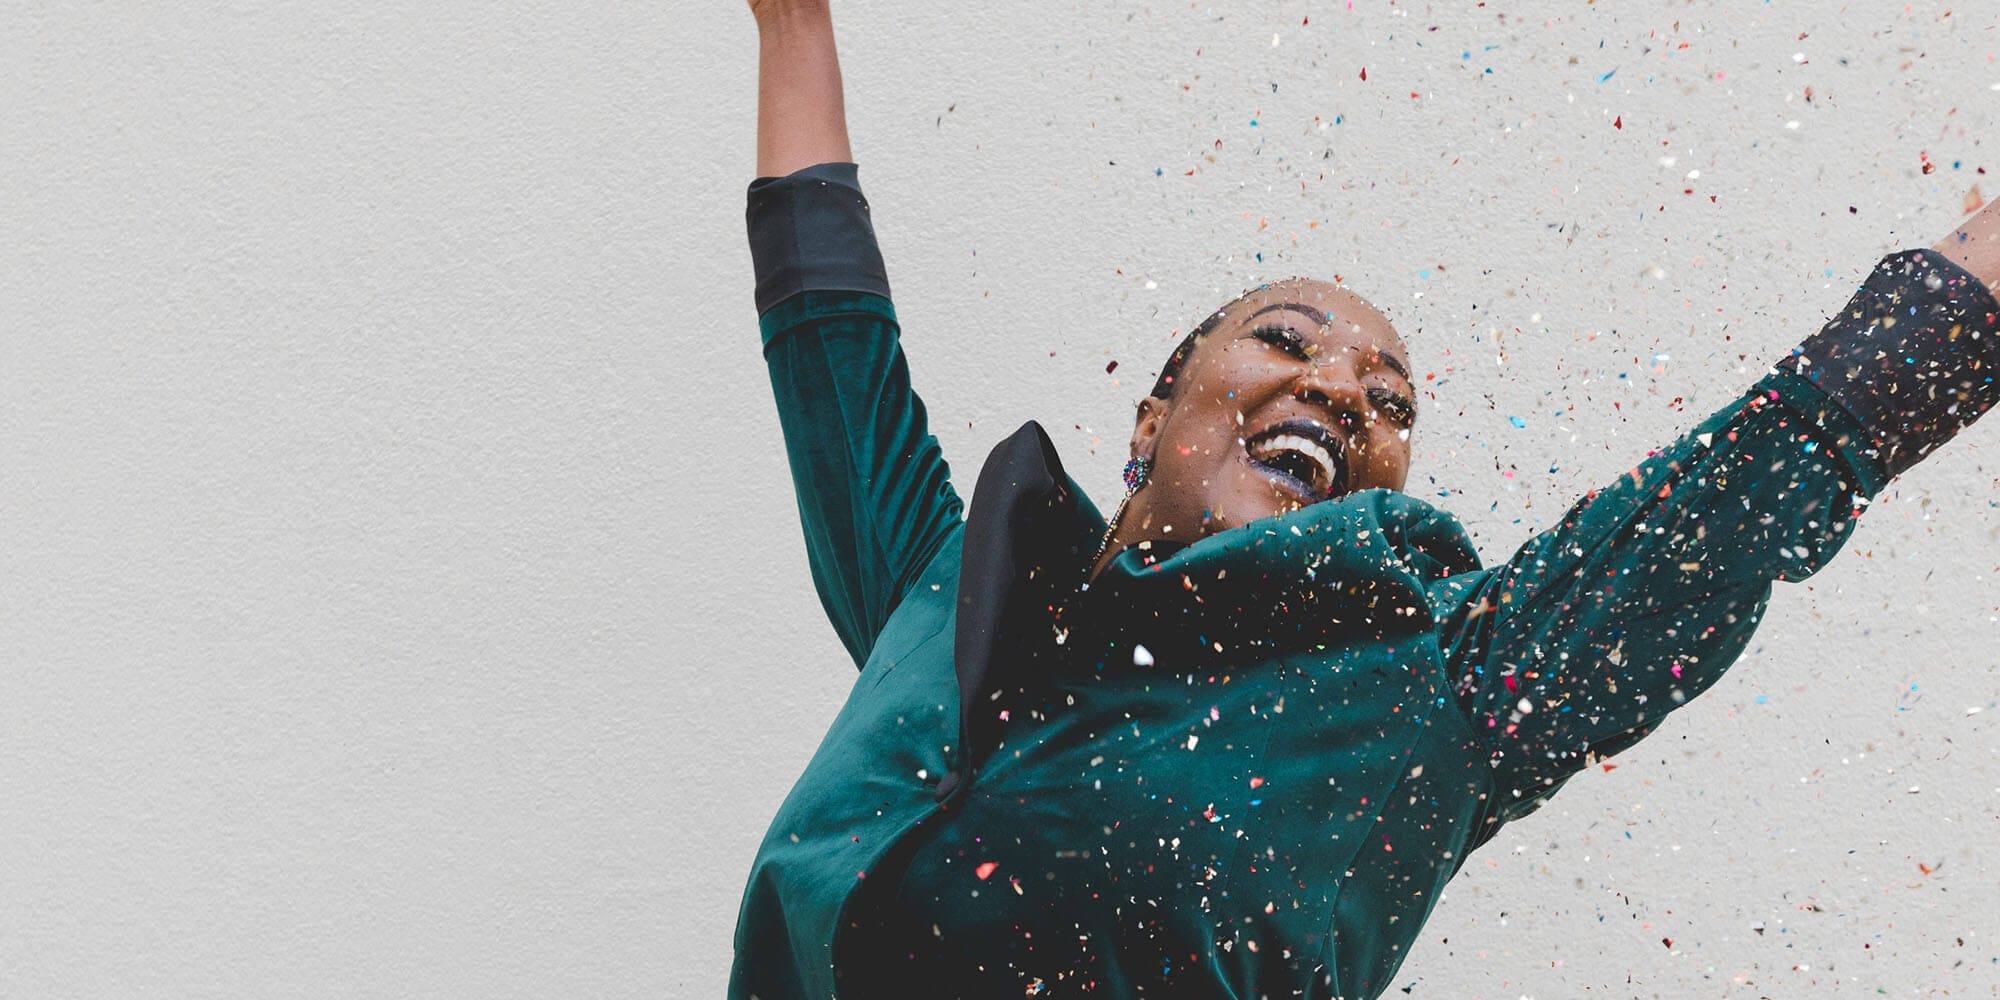 Woman in green jacket, hands up in celebration and multi-colored confetti falling.